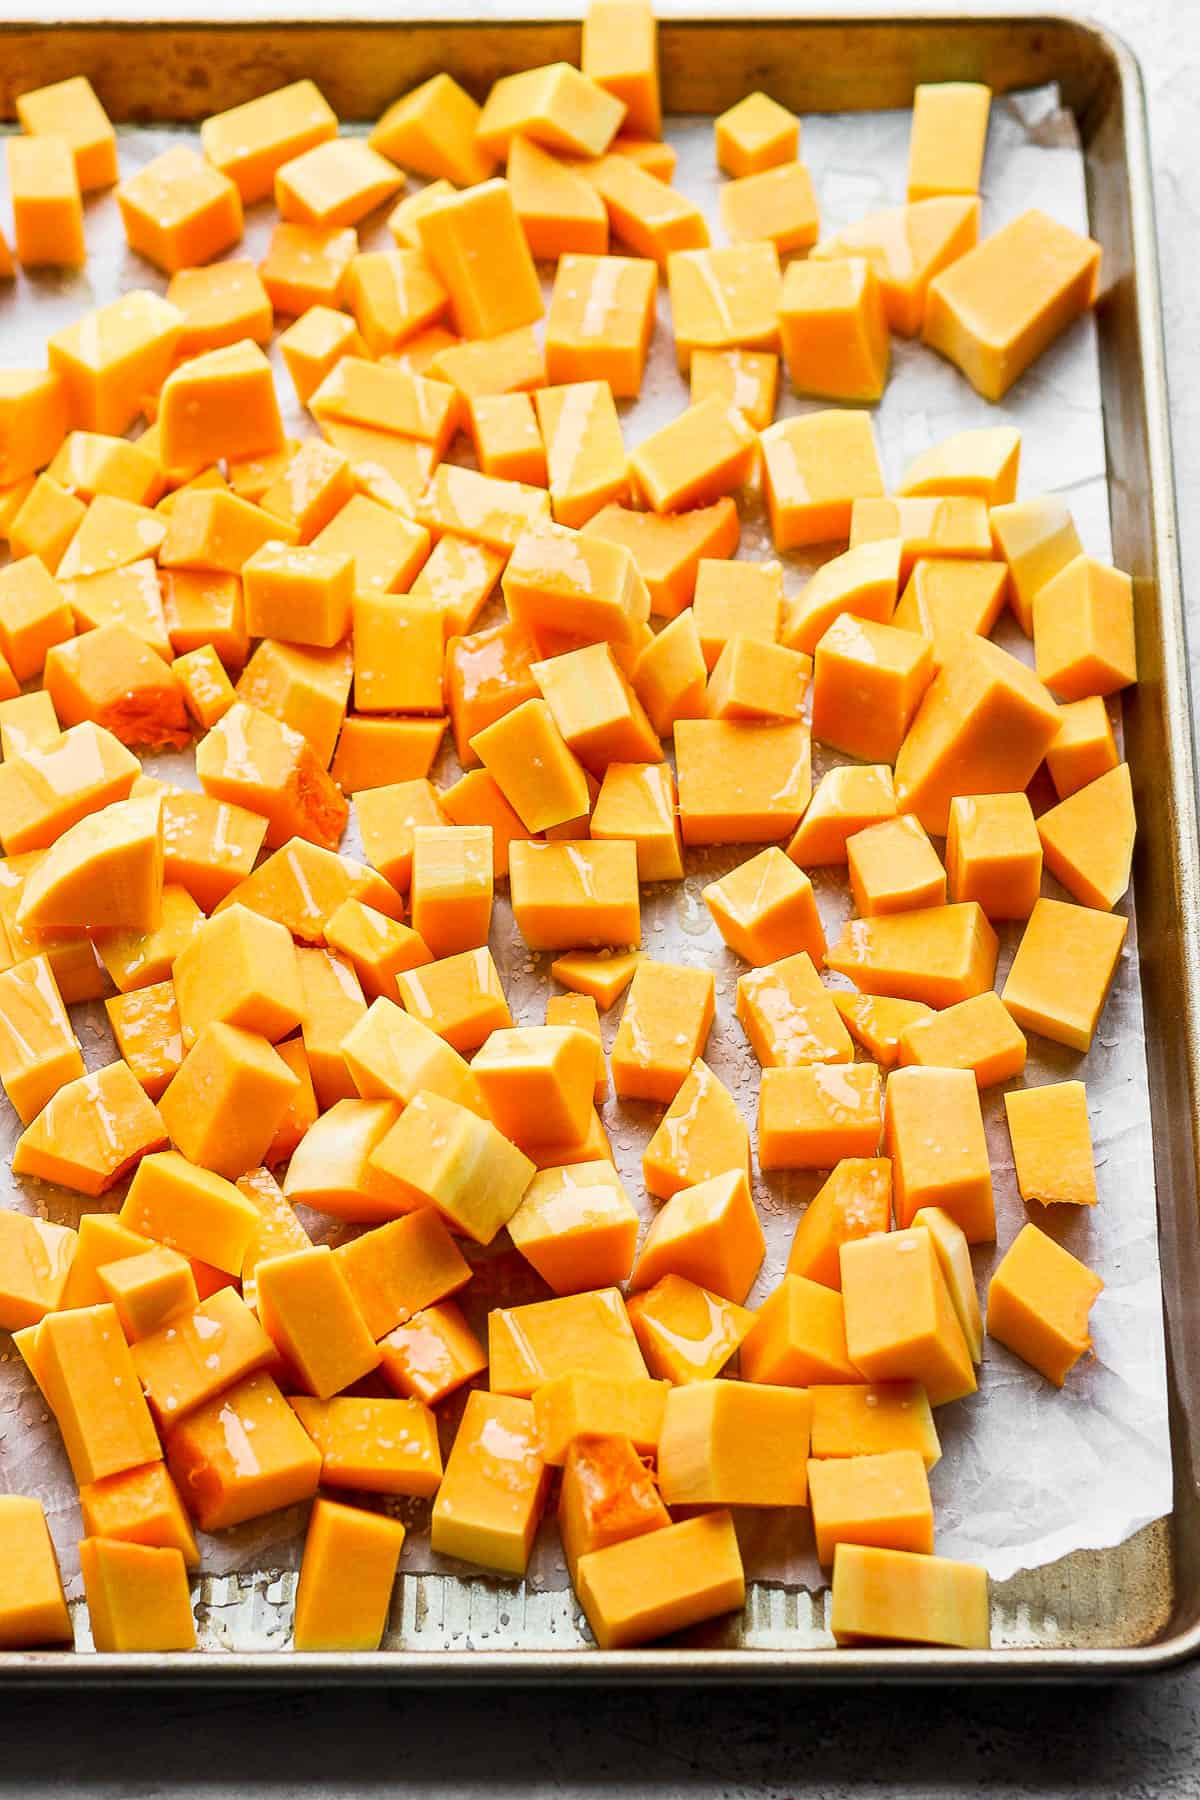 How to easily cut butternut squash 3 different ways.